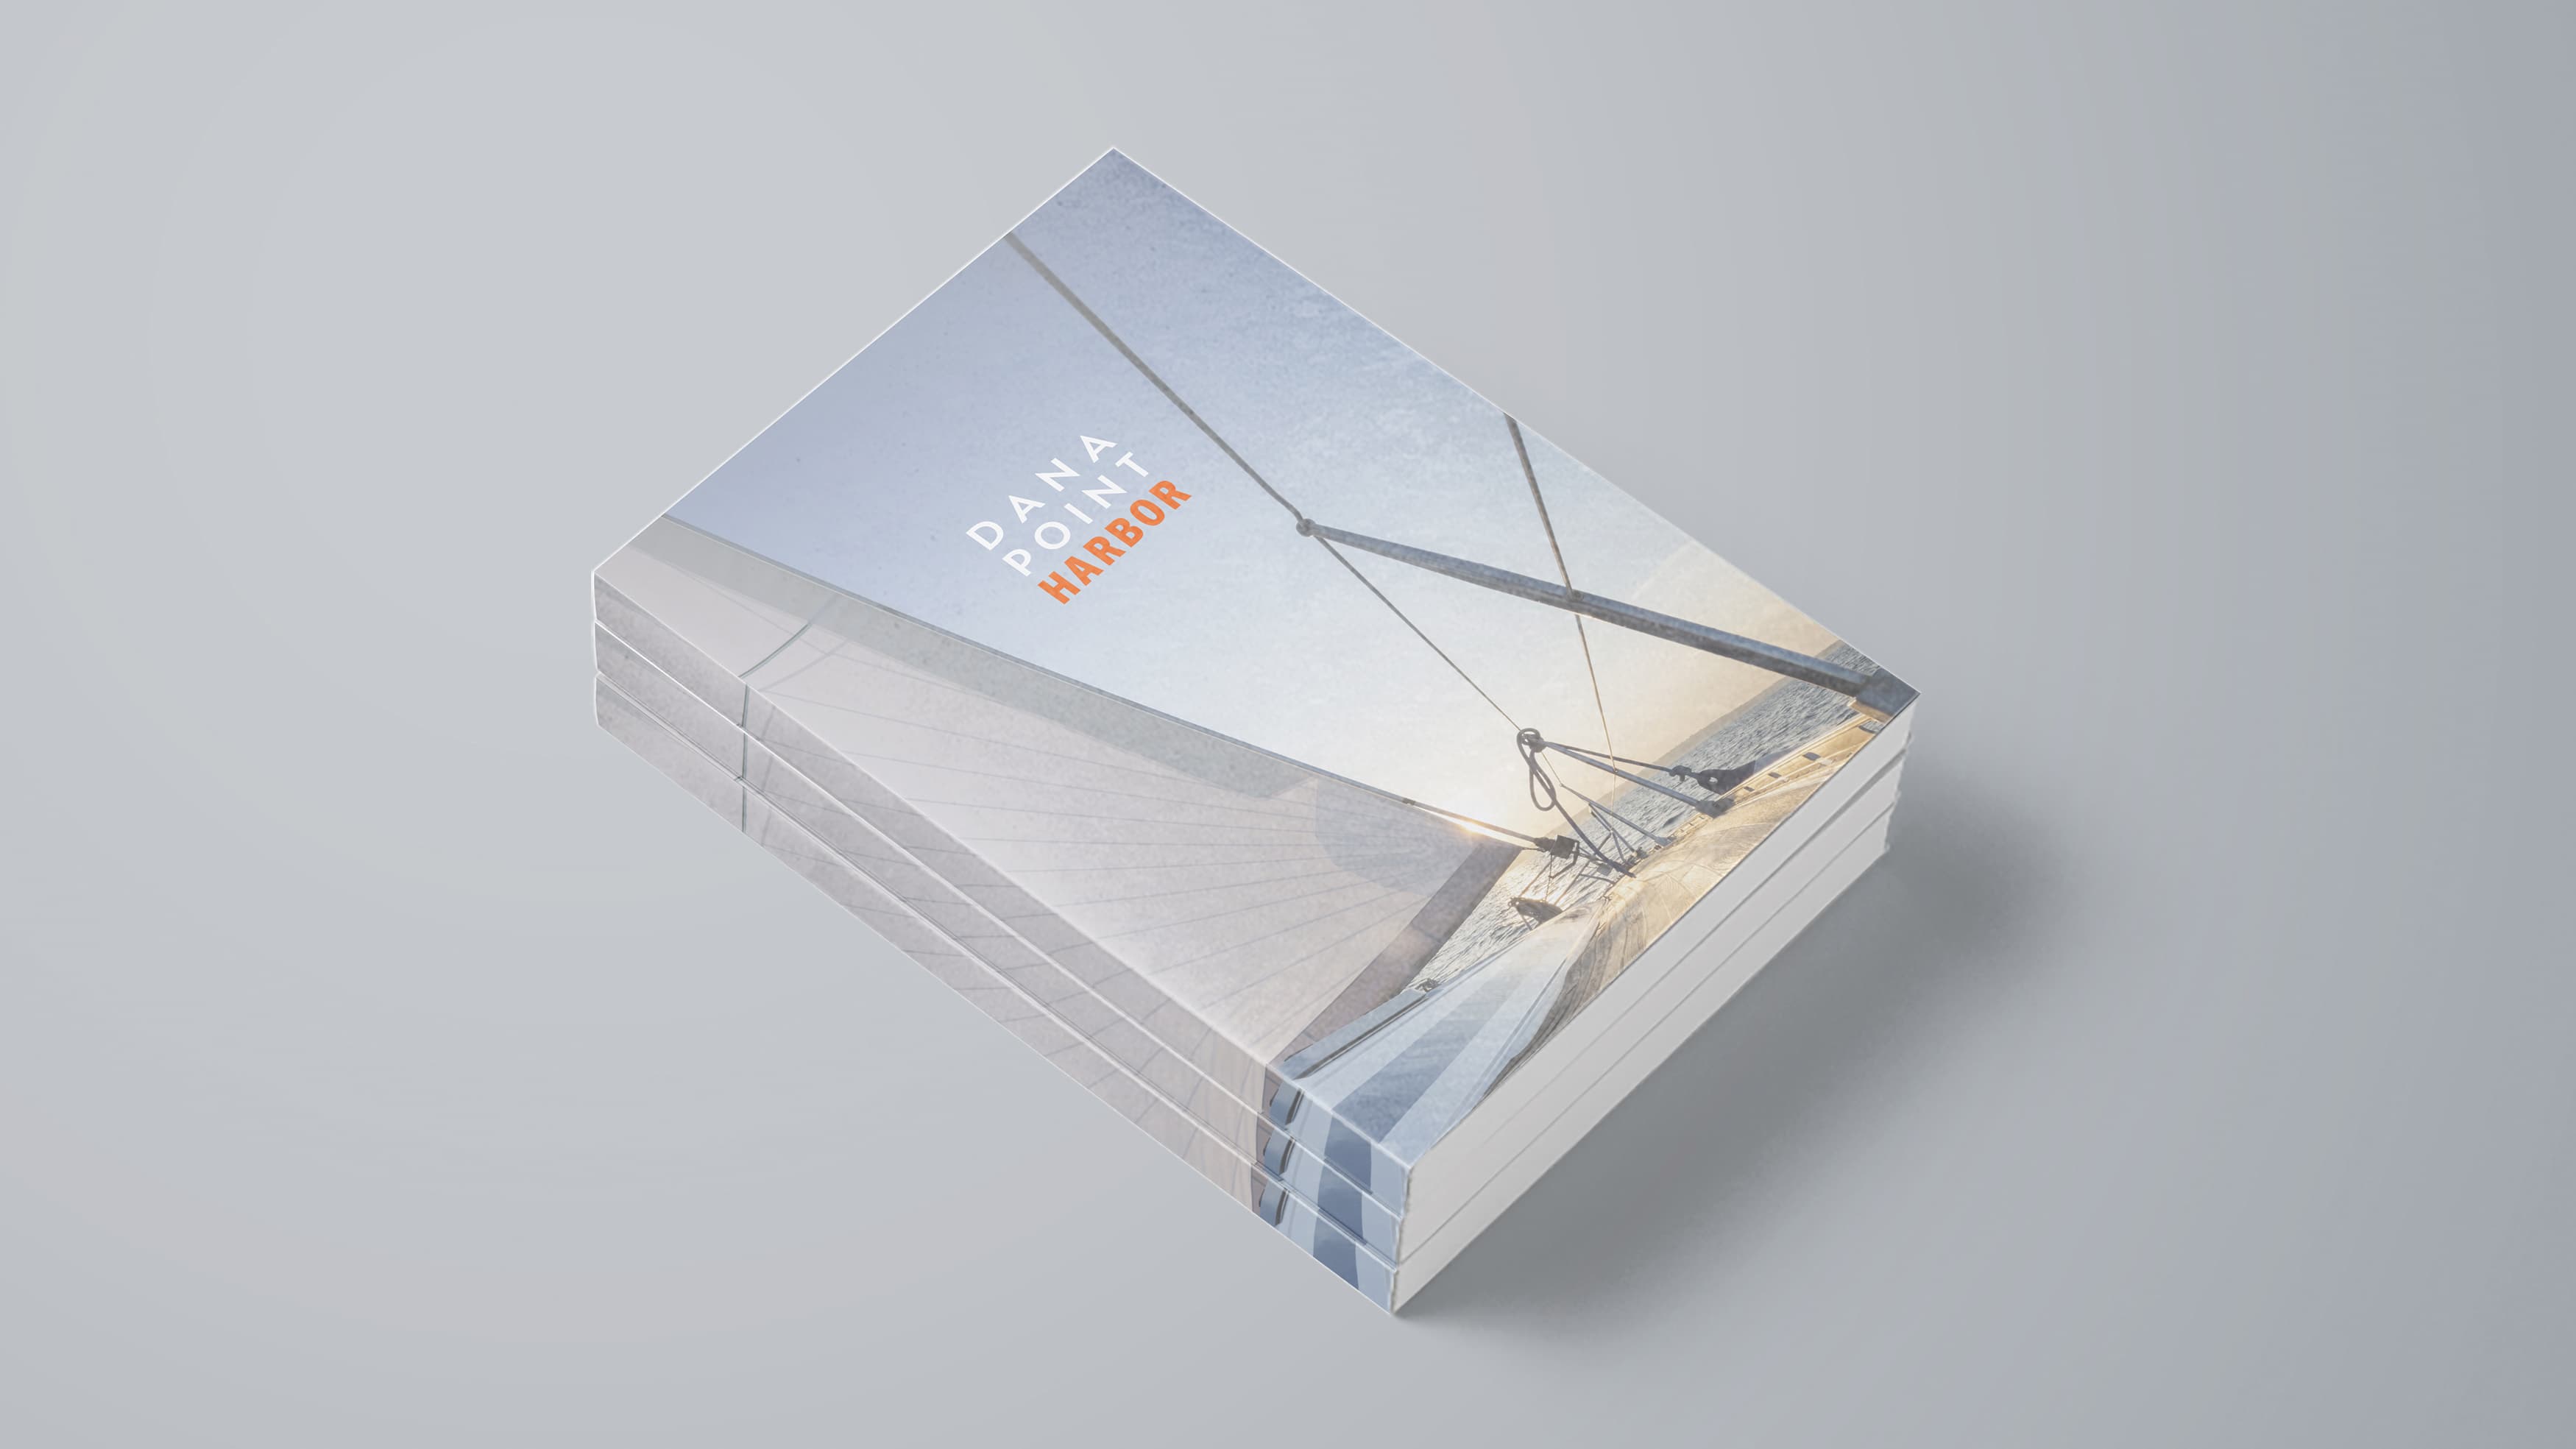 Mockup of the cover of a Dana Point Harbor leasing brochure with logo and sailboat image in the background